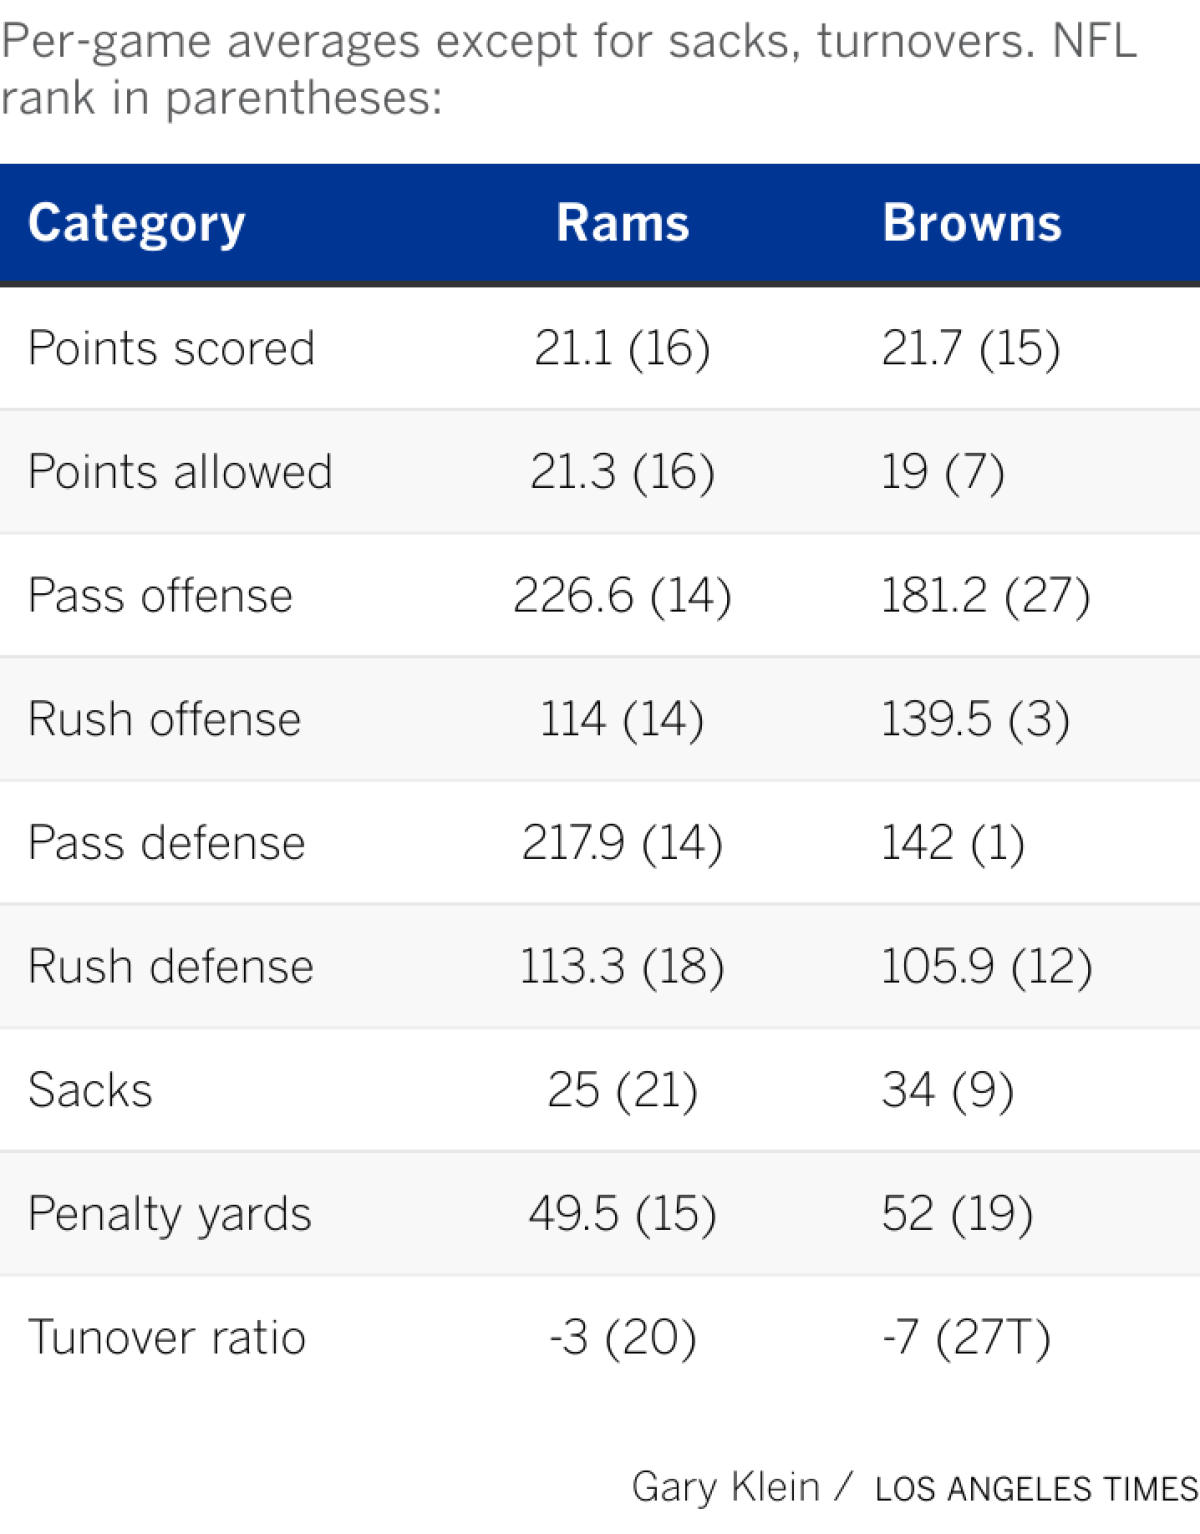 Breaking down the top team statistics for both the Rams and the Browns.